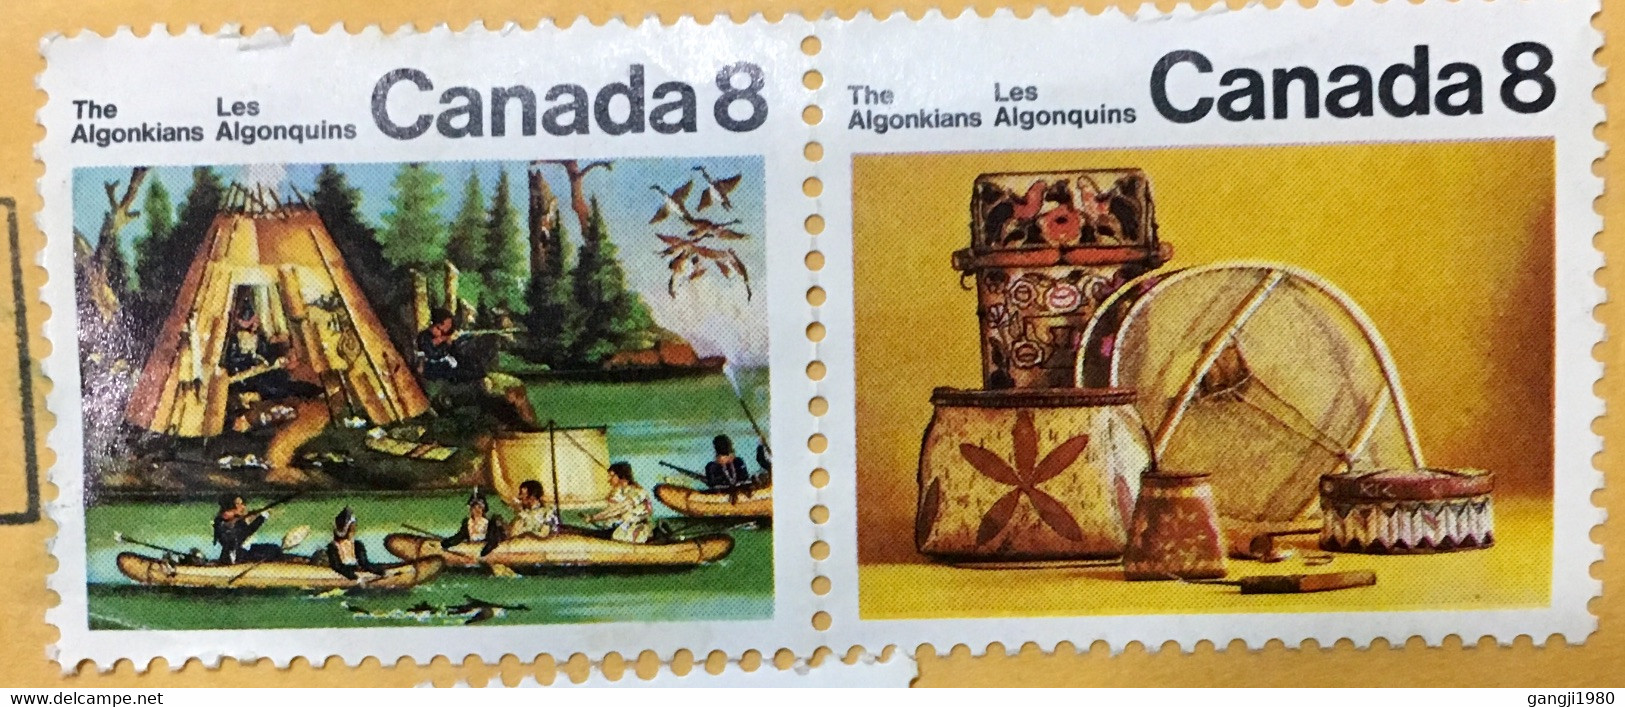 CANADA 2008, COVER 31 STAMPS ALL WITHOUT CANCELLATION ,BOOKLET PANE ,BLOCK ,FLOWER SHIP ,AEROPLANE ,CHIRSTMAS ,BOAT RACE - Brieven En Documenten